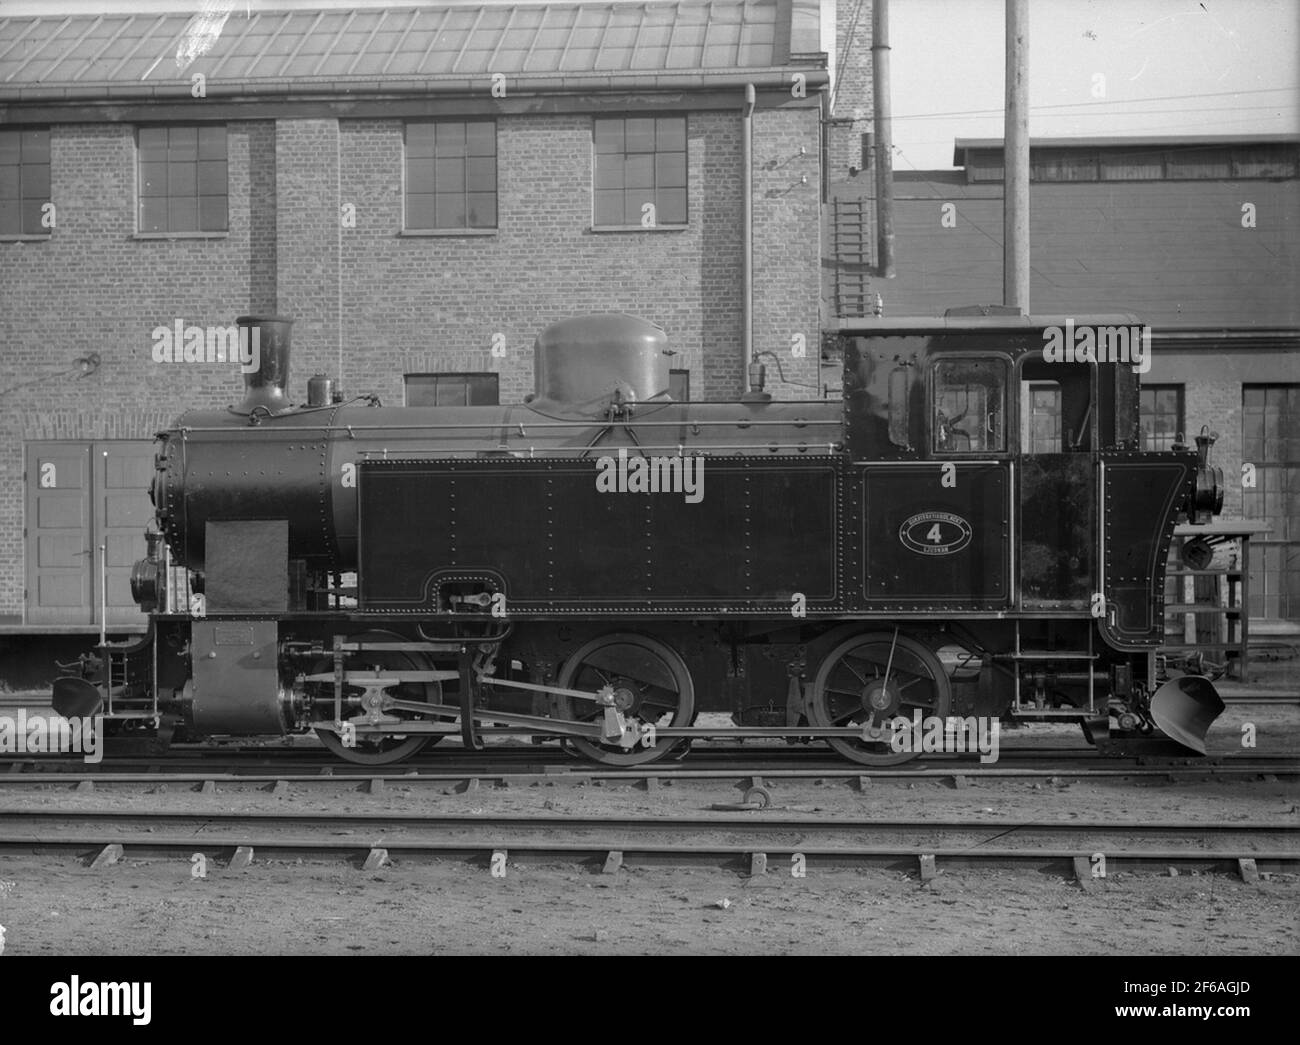 Vallvik, Ljusnan Sulfit AB Lok 4. The locomotive was manufactured by Nohab, manufacturing number 1761. Delivery photo. Stock Photo